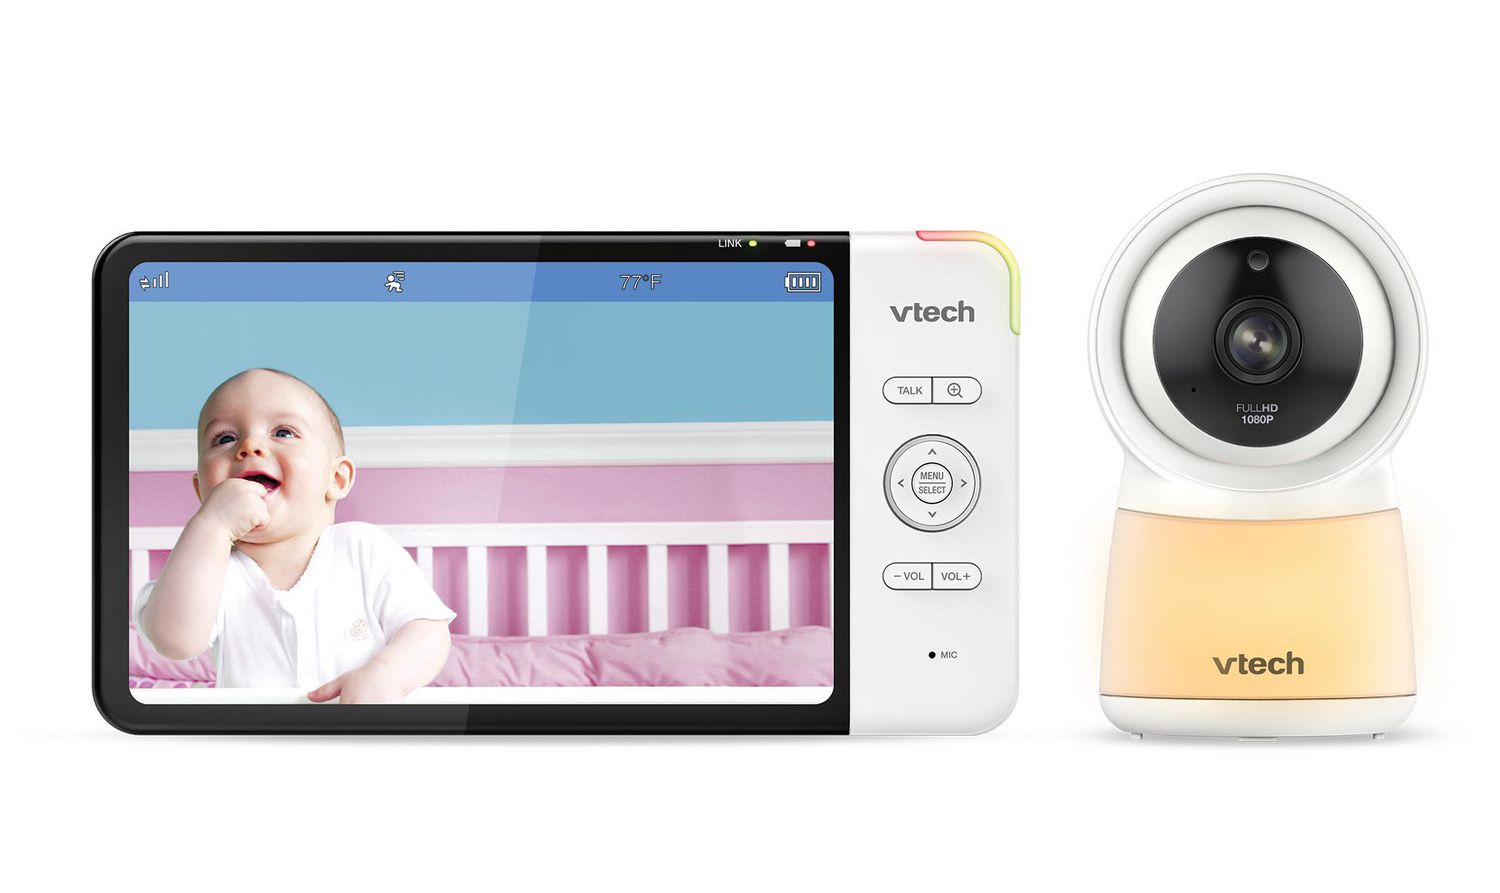 VTech VM5255-2 2 Digital Camera Video Baby Monitor With Pan Zoom and Night  Light for sale online